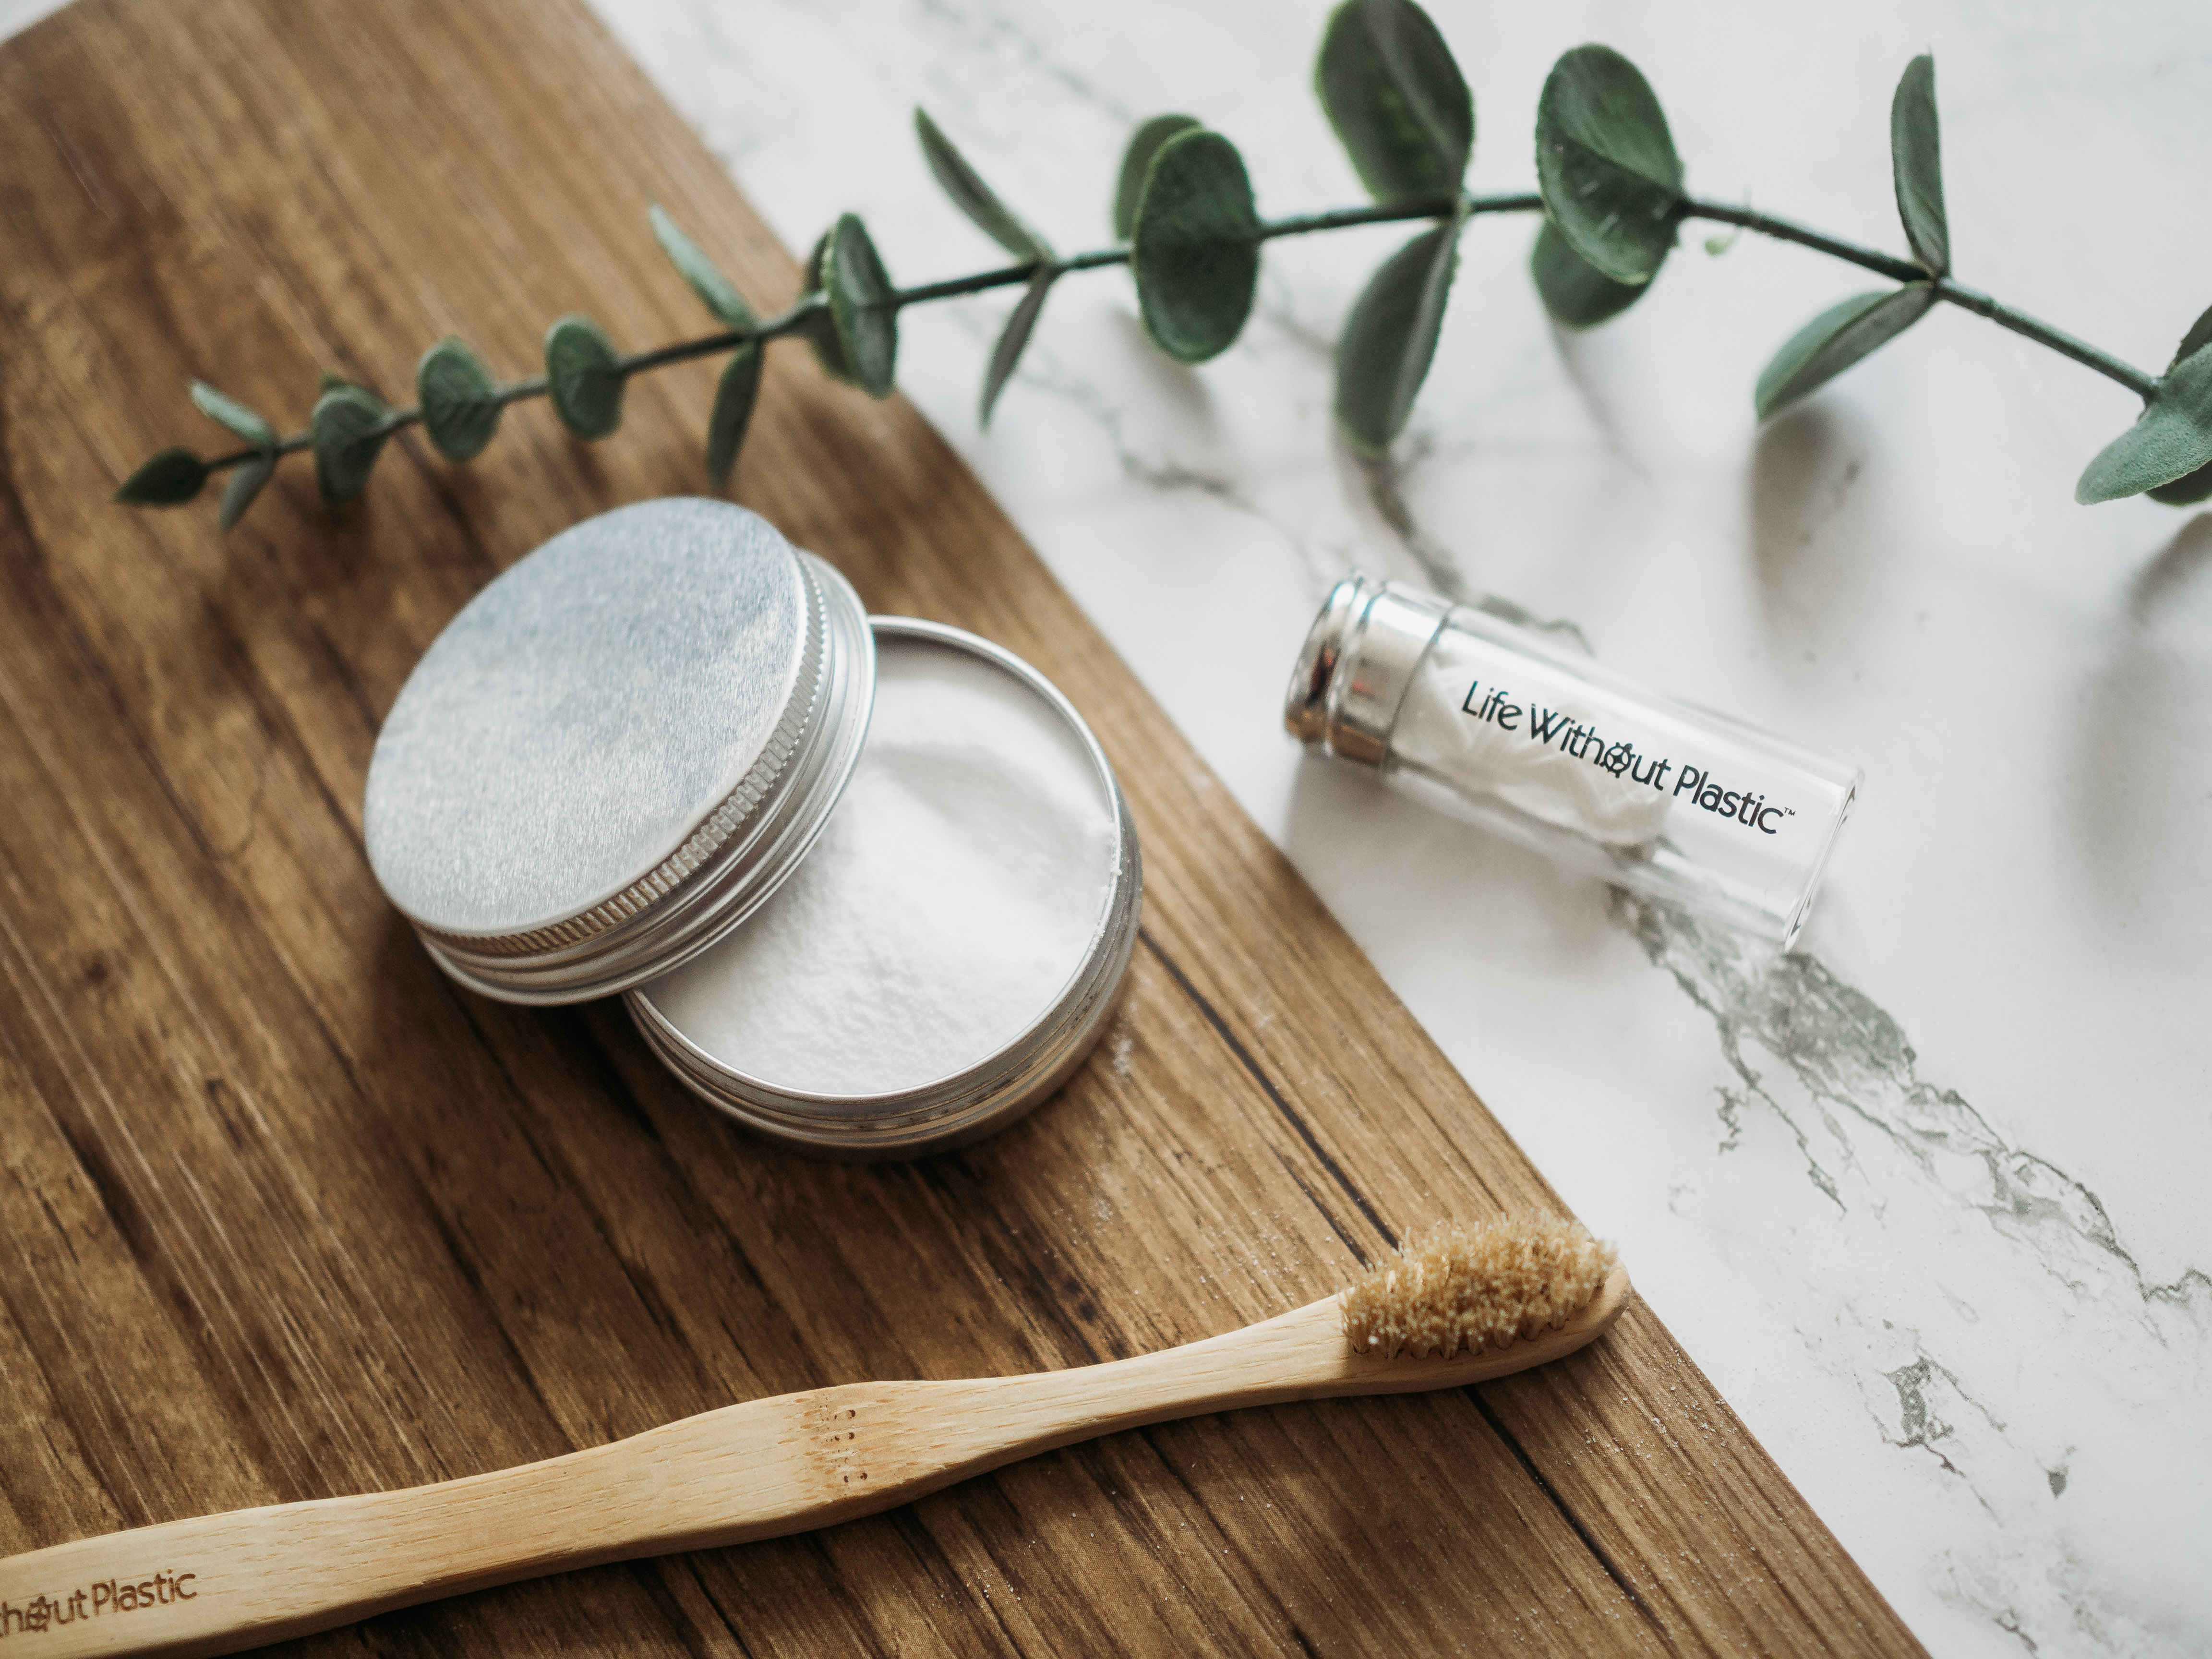 Life Without Plastic's compostable toothbrush, silk floss in a reusable glass jar, and baking soda in tin container on a wooden platform.